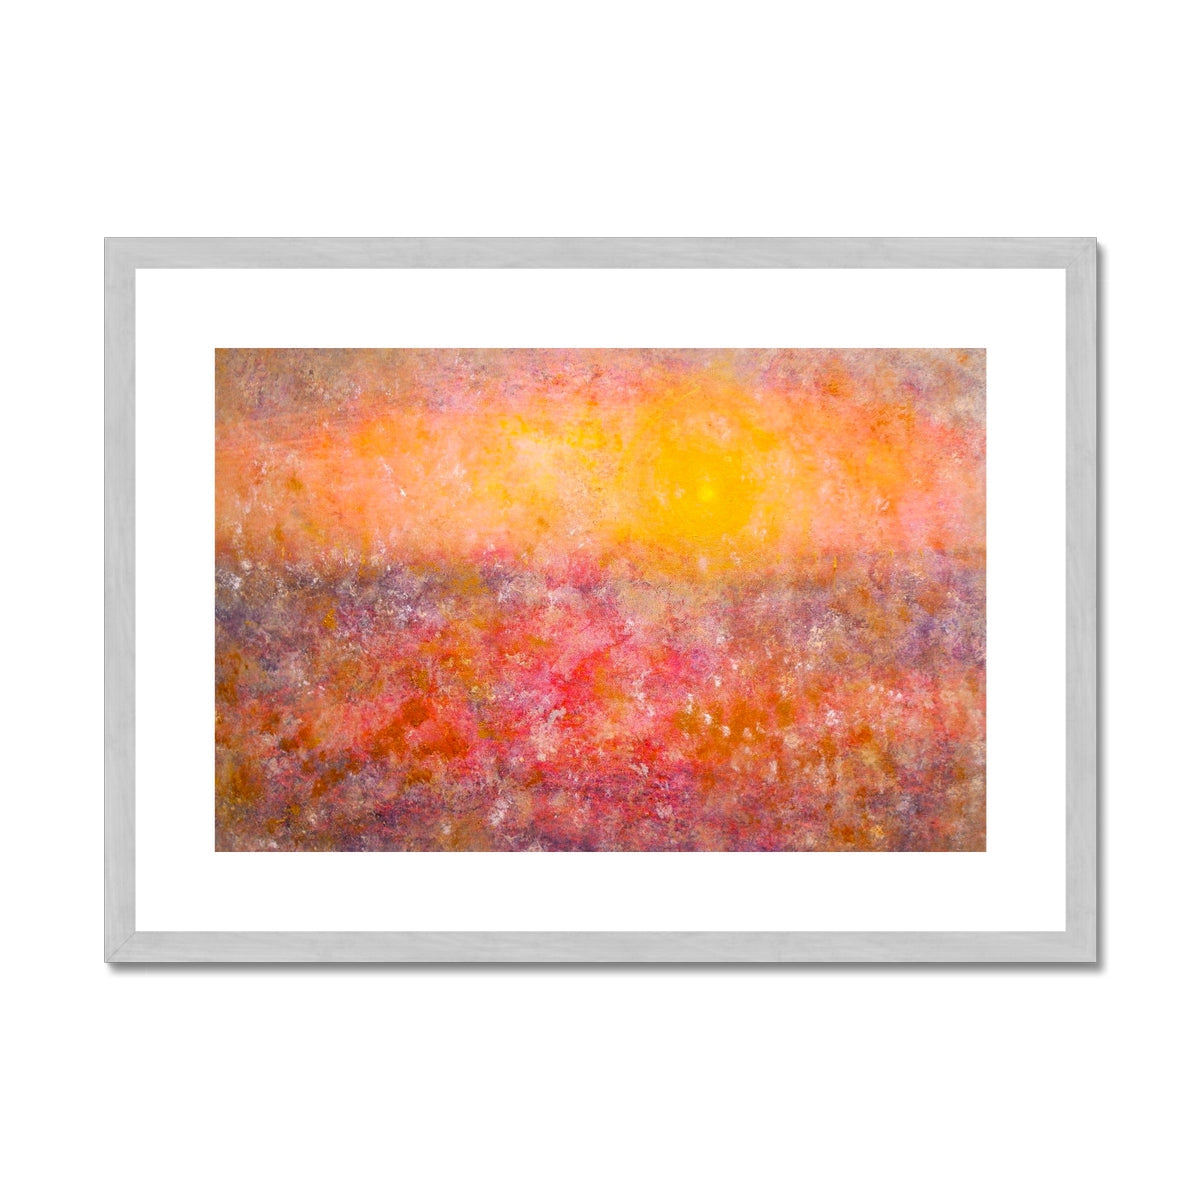 Sunrise Mist Horizon Abstract Painting | Antique Framed & Mounted Prints From Scotland-Antique Framed & Mounted Prints-Abstract & Impressionistic Art Gallery-A2 Landscape-Silver Frame-Paintings, Prints, Homeware, Art Gifts From Scotland By Scottish Artist Kevin Hunter